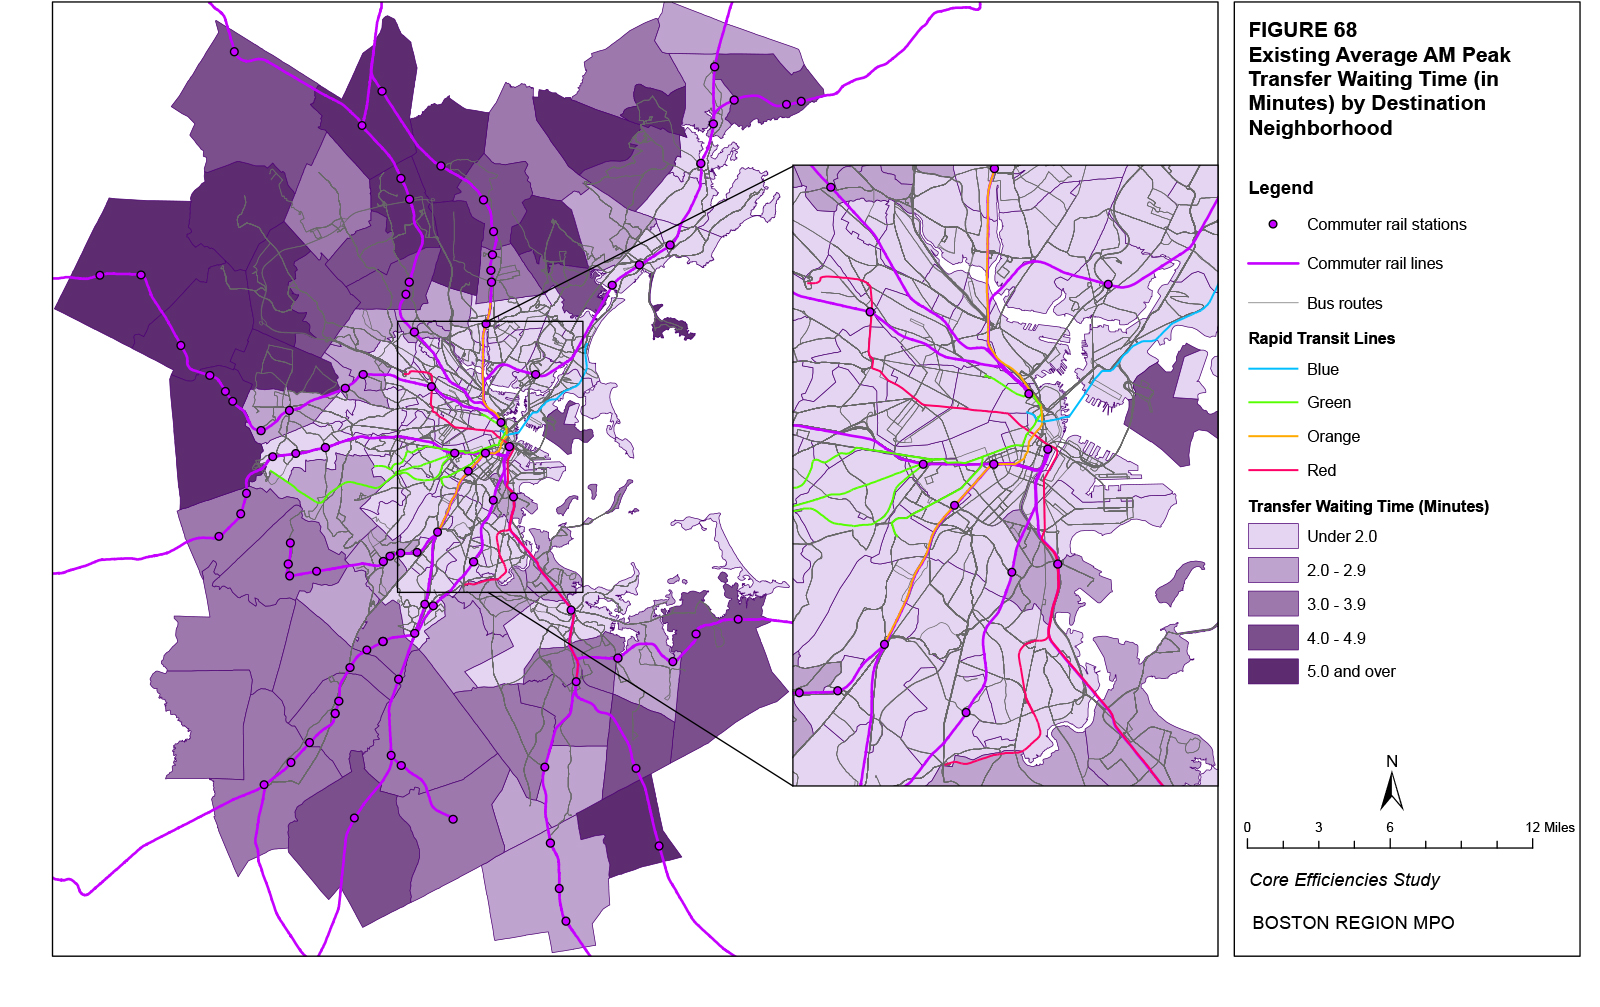 This map shows the existing average AM peak transfer waiting times for destination trips by neighborhood.